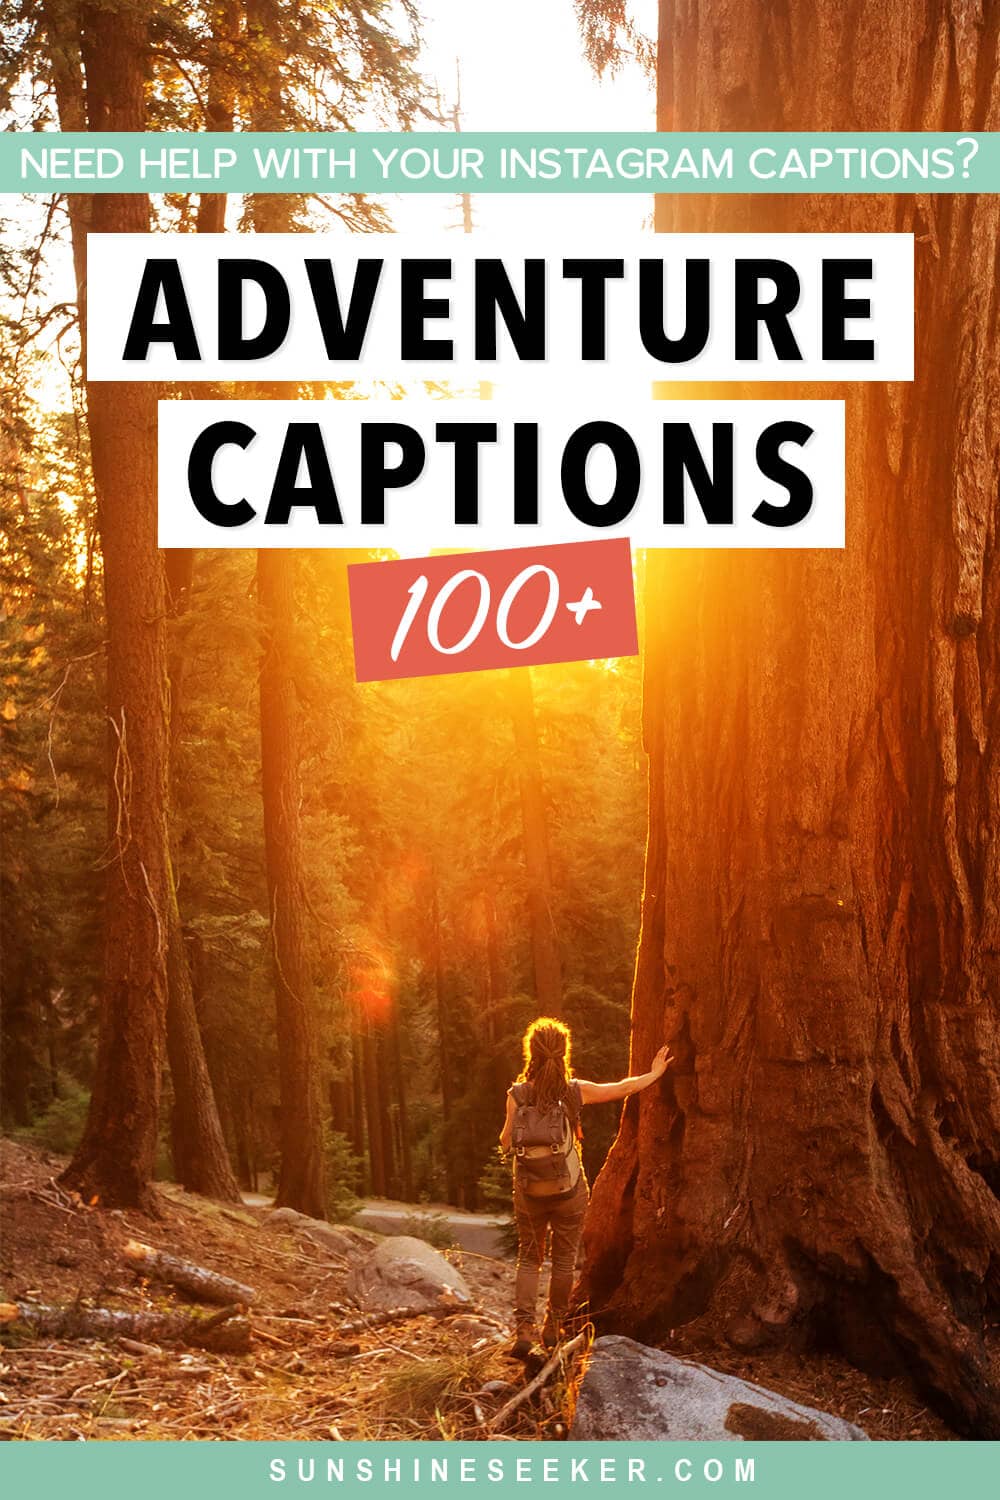 Adventure captions for Instagram - Including couples adventure Instagram captions, travel captions, funny adventure captions and adventure quotes by famous people. Get your travel captions for social media here!